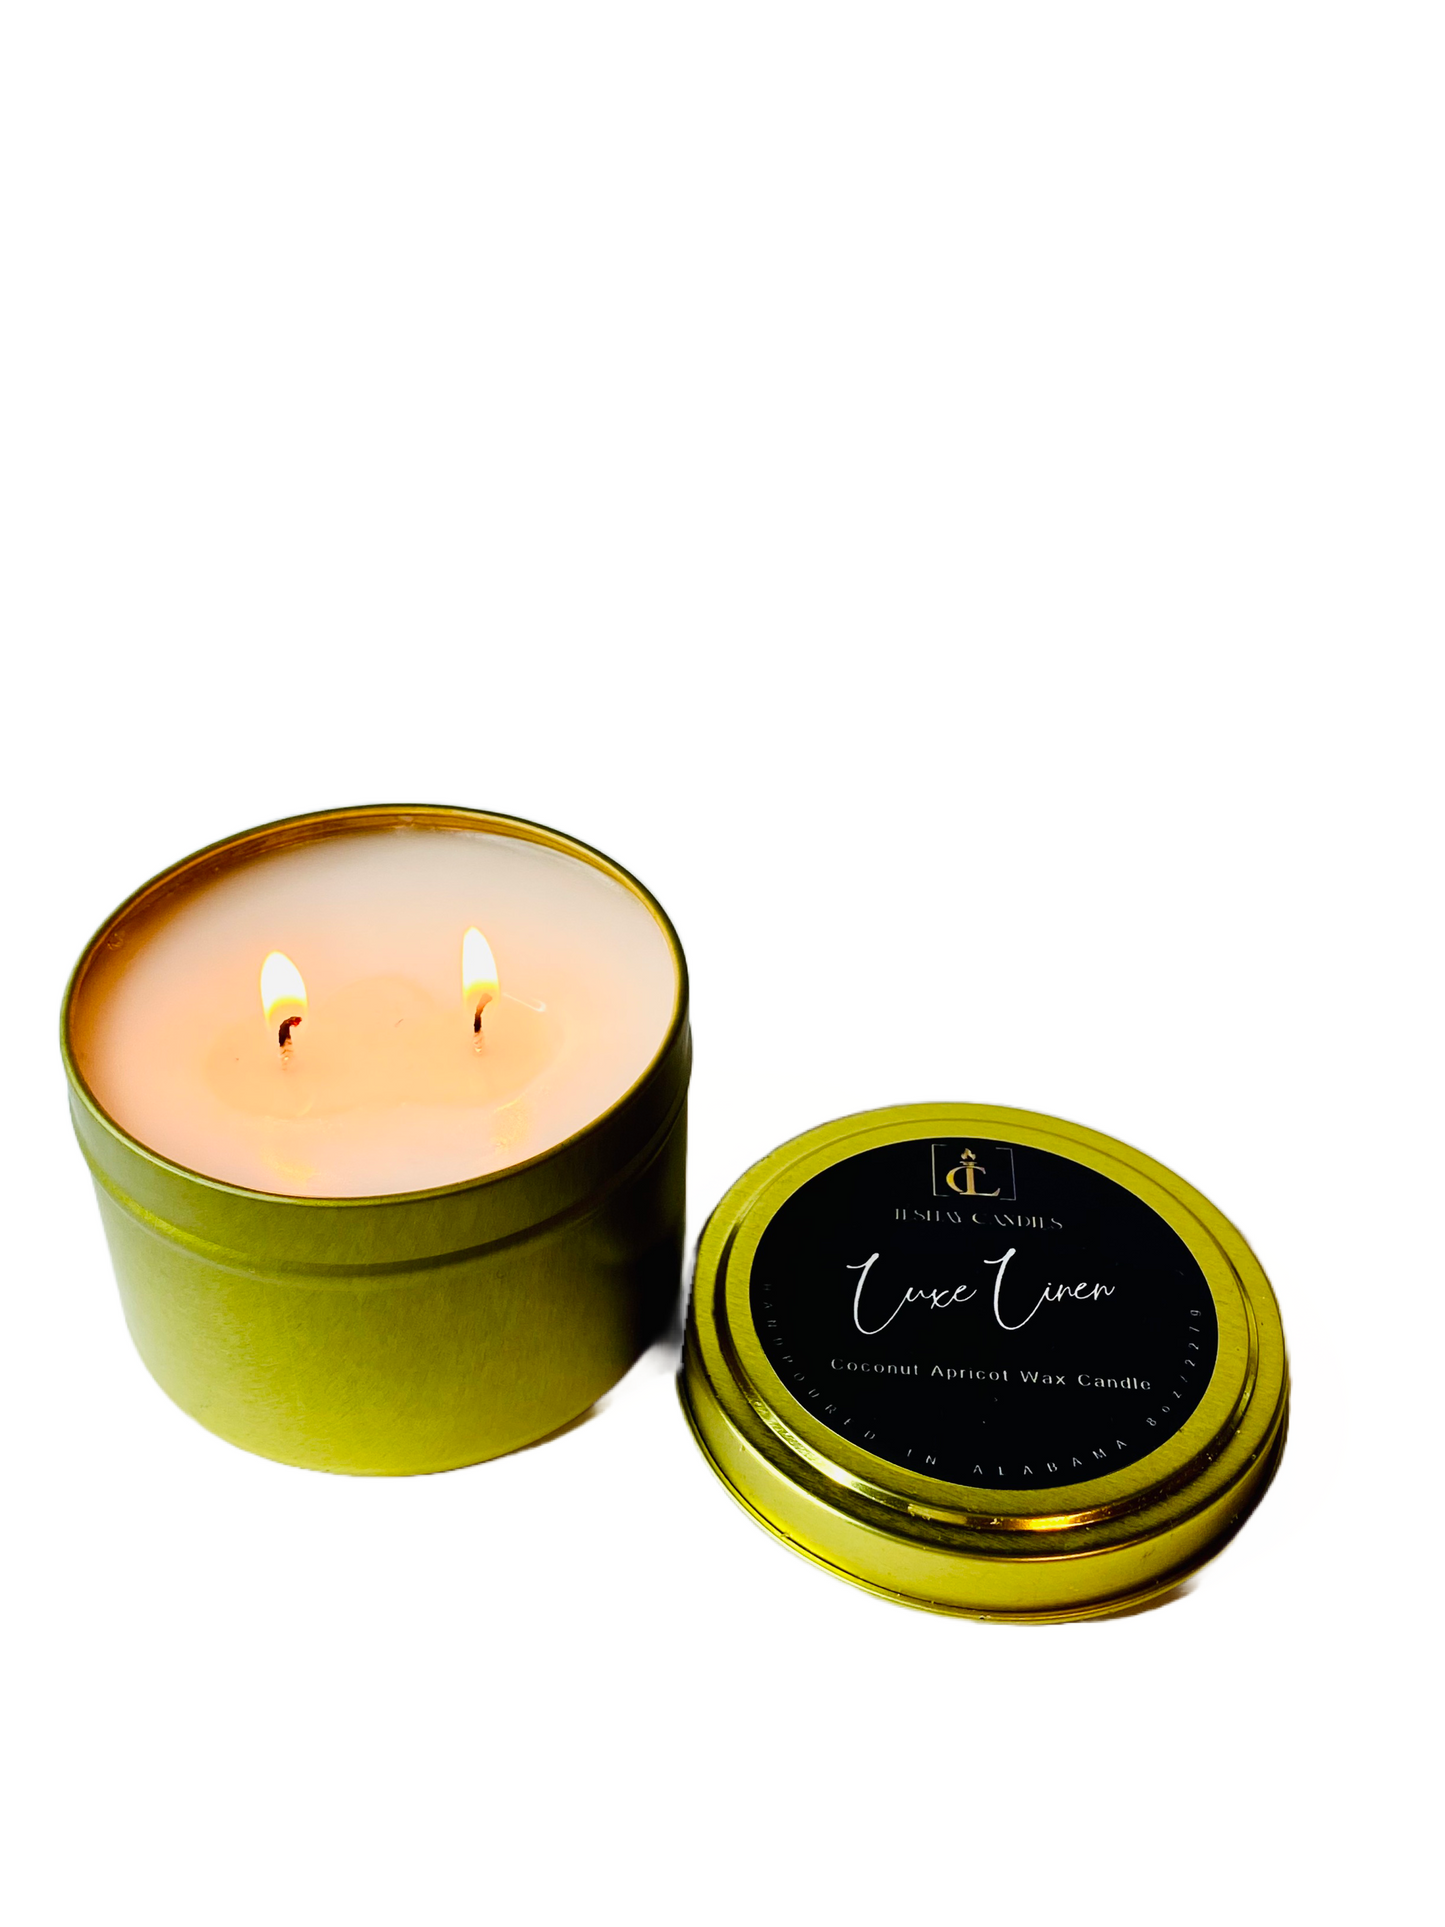 “LUXE LINEN” LUXURY TRAVEL TIN CANDLE